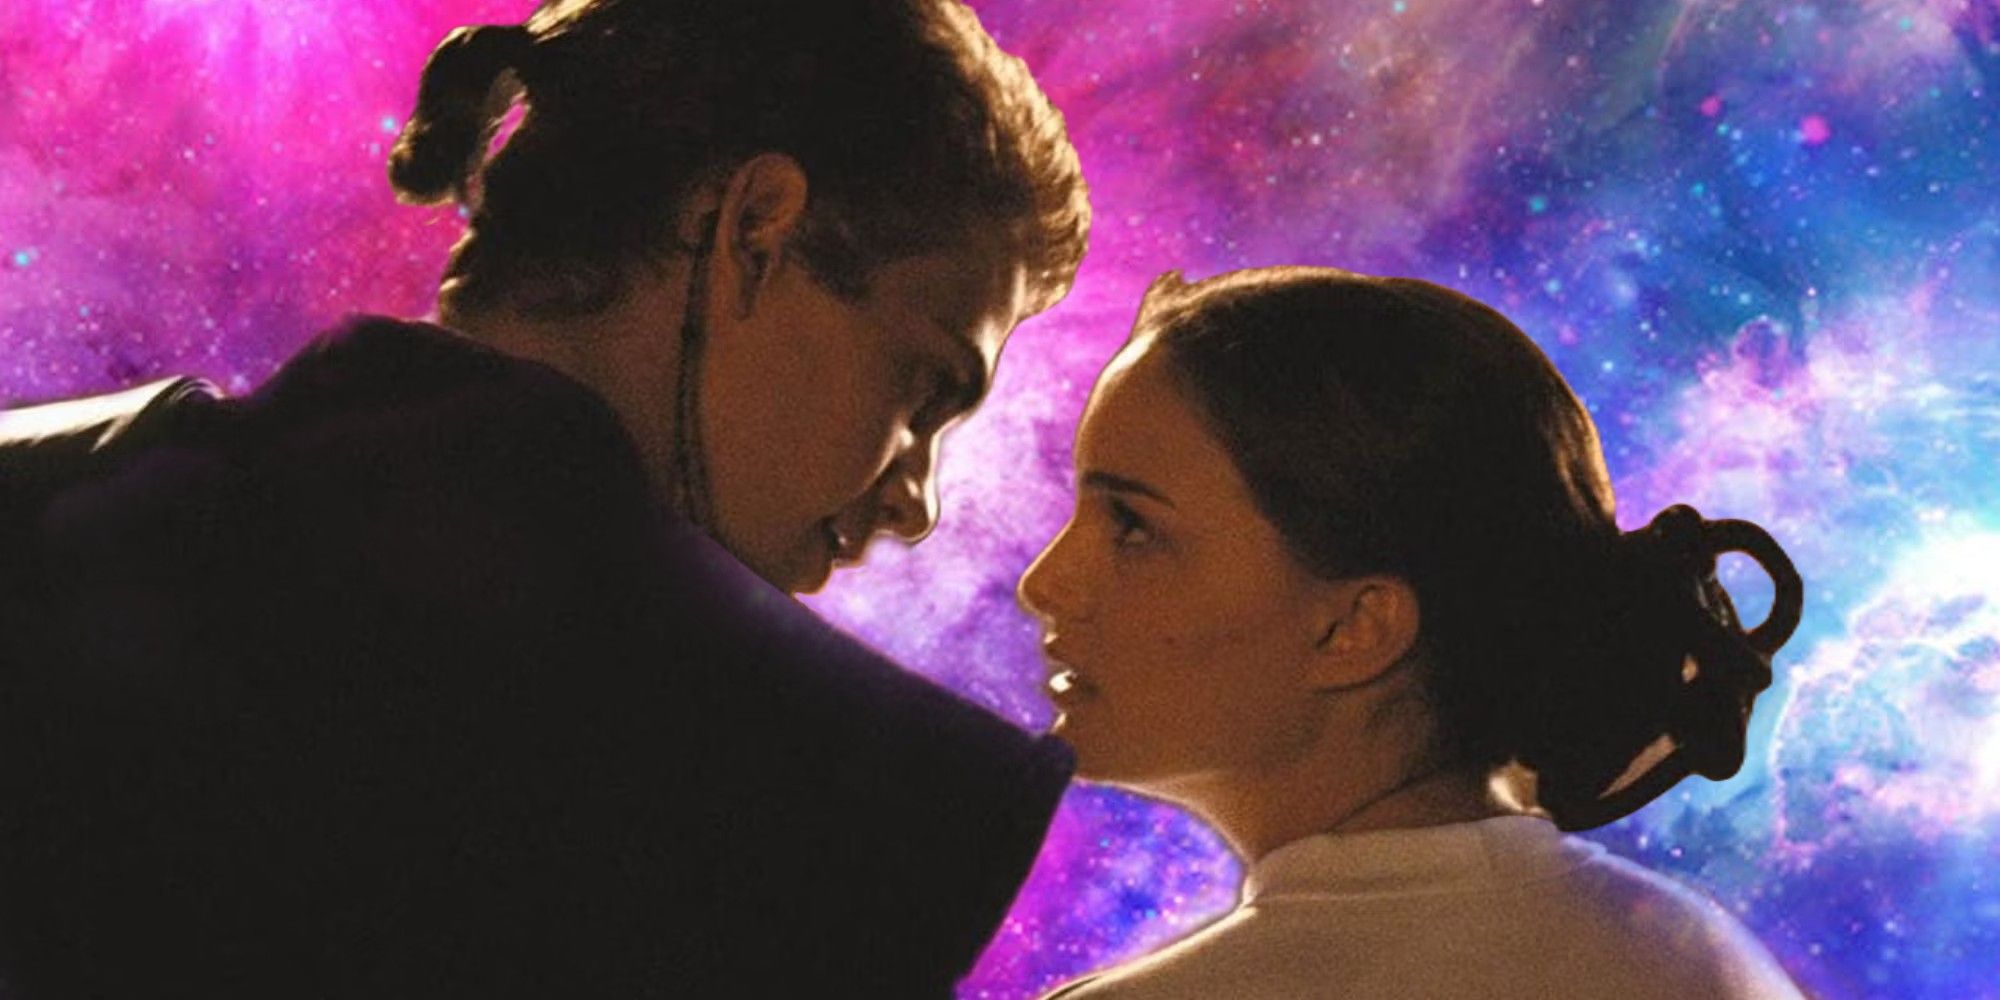 Anakin Skywalker (Hayden Christensen) and Padme Amidala (Natalie Portman) stare passionately into each other's eyes against a pink and blue space background in Star Wars: Episode II - Attack of the Clones